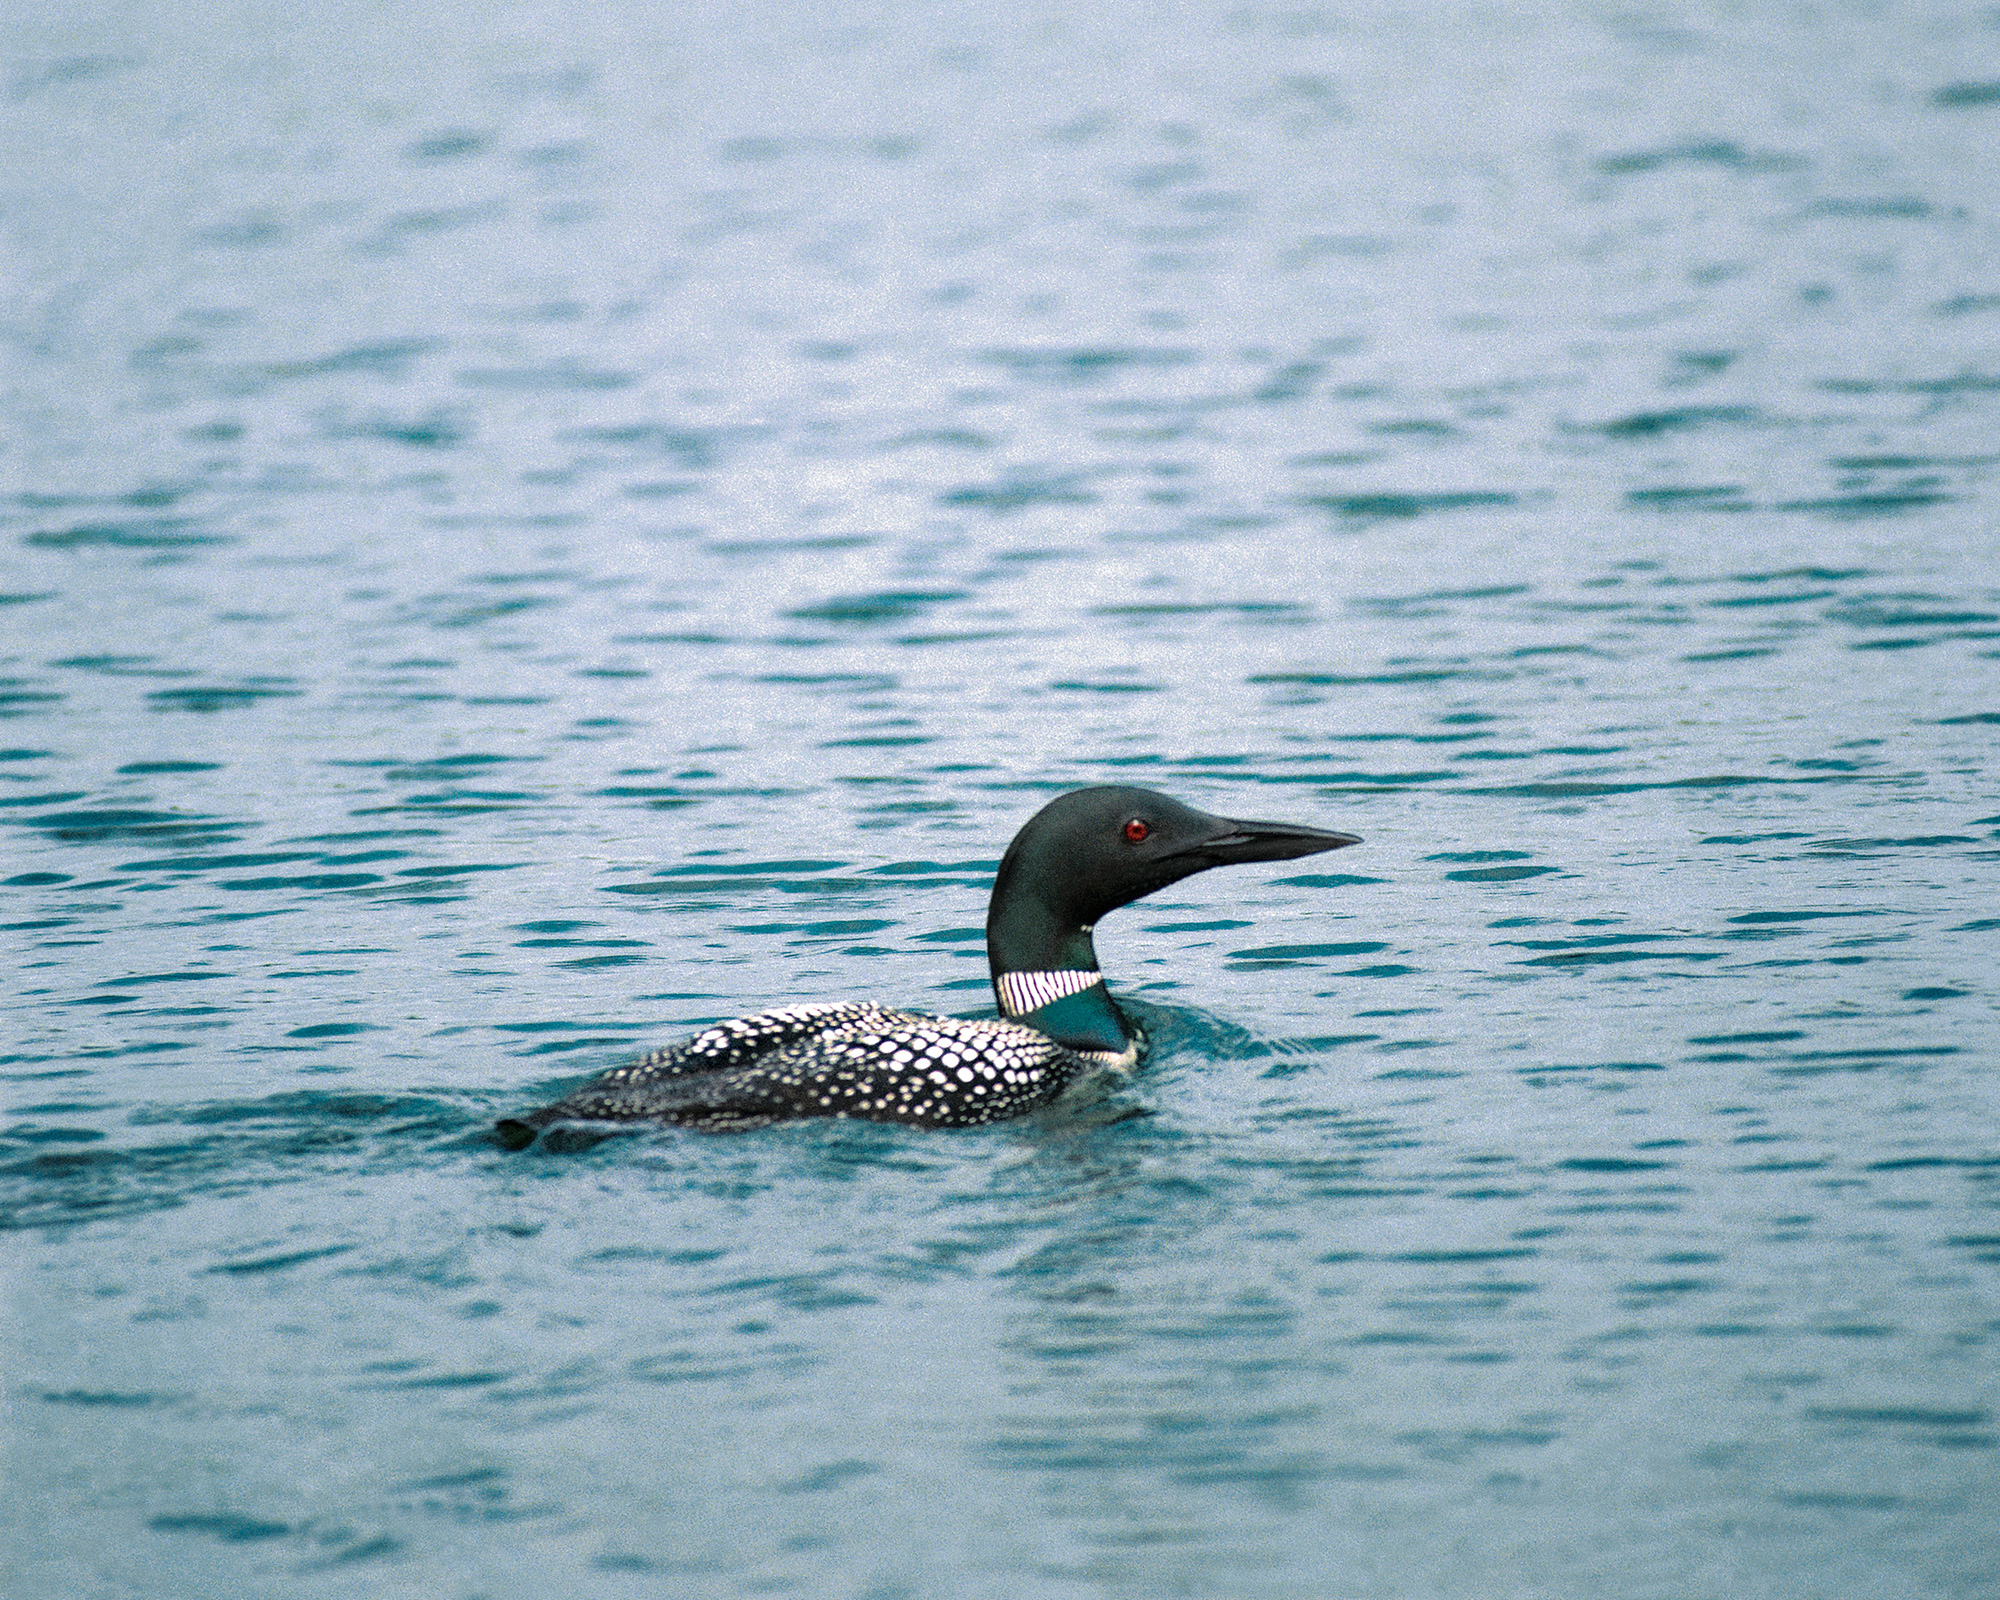 Common loon photograph by Sam Johnson in Lake Owen, Wisconsin